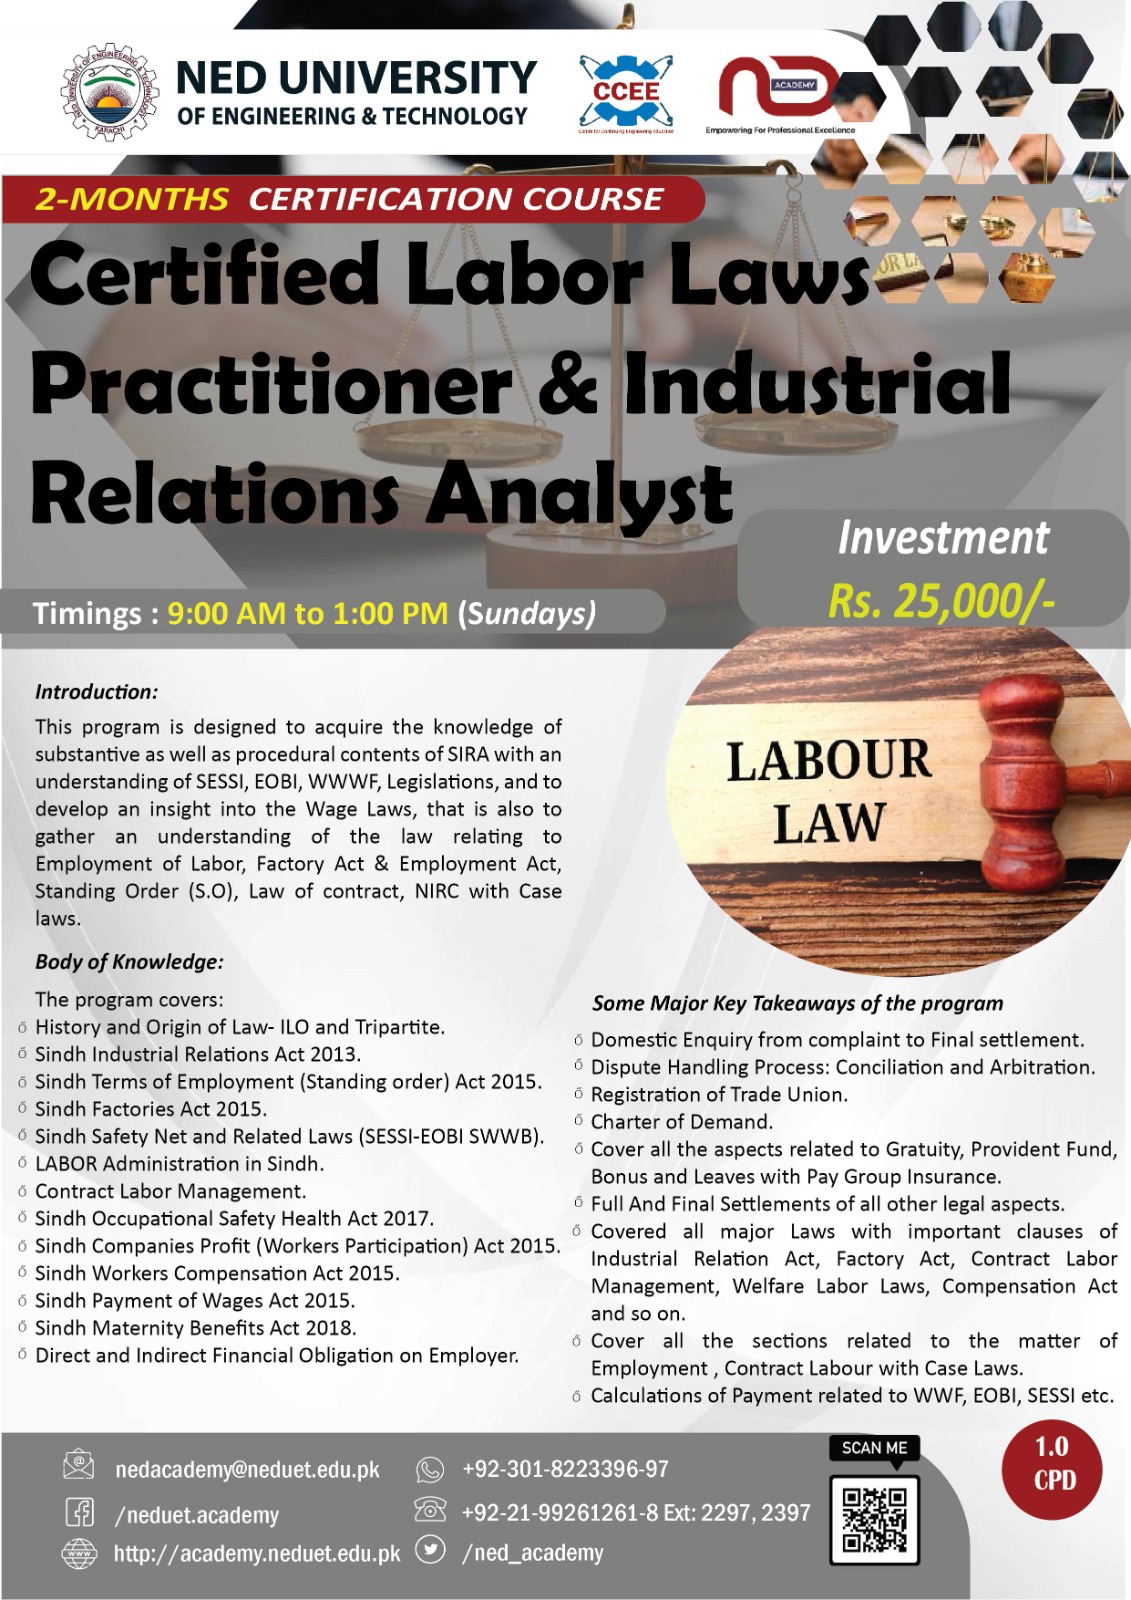 Certified Labor Laws Practitioner & Industrial Relations Analyst